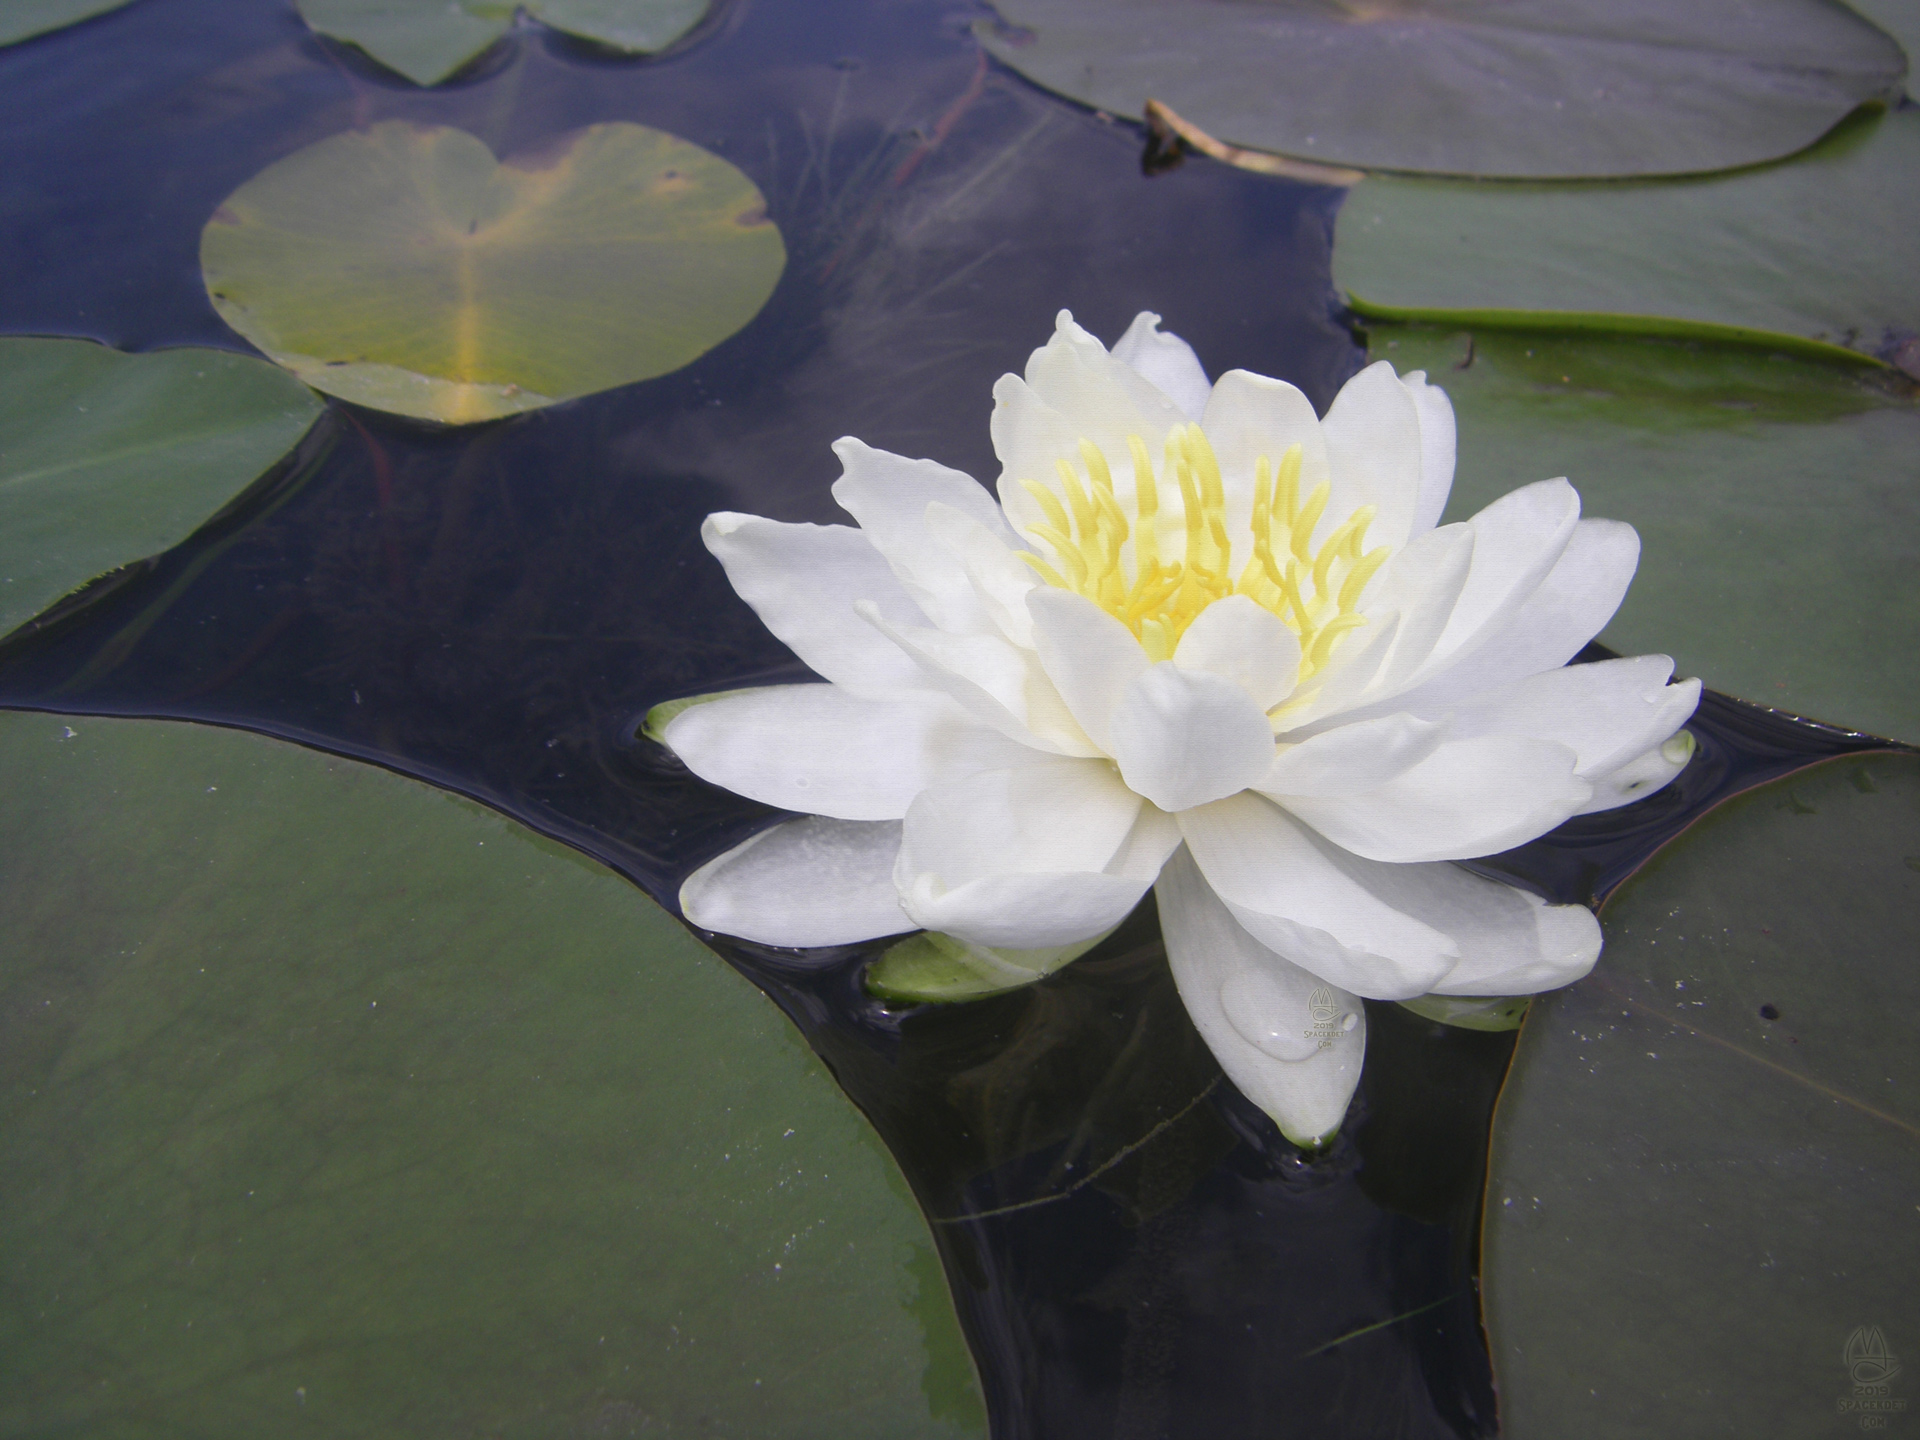 Lily Pad in bloom.